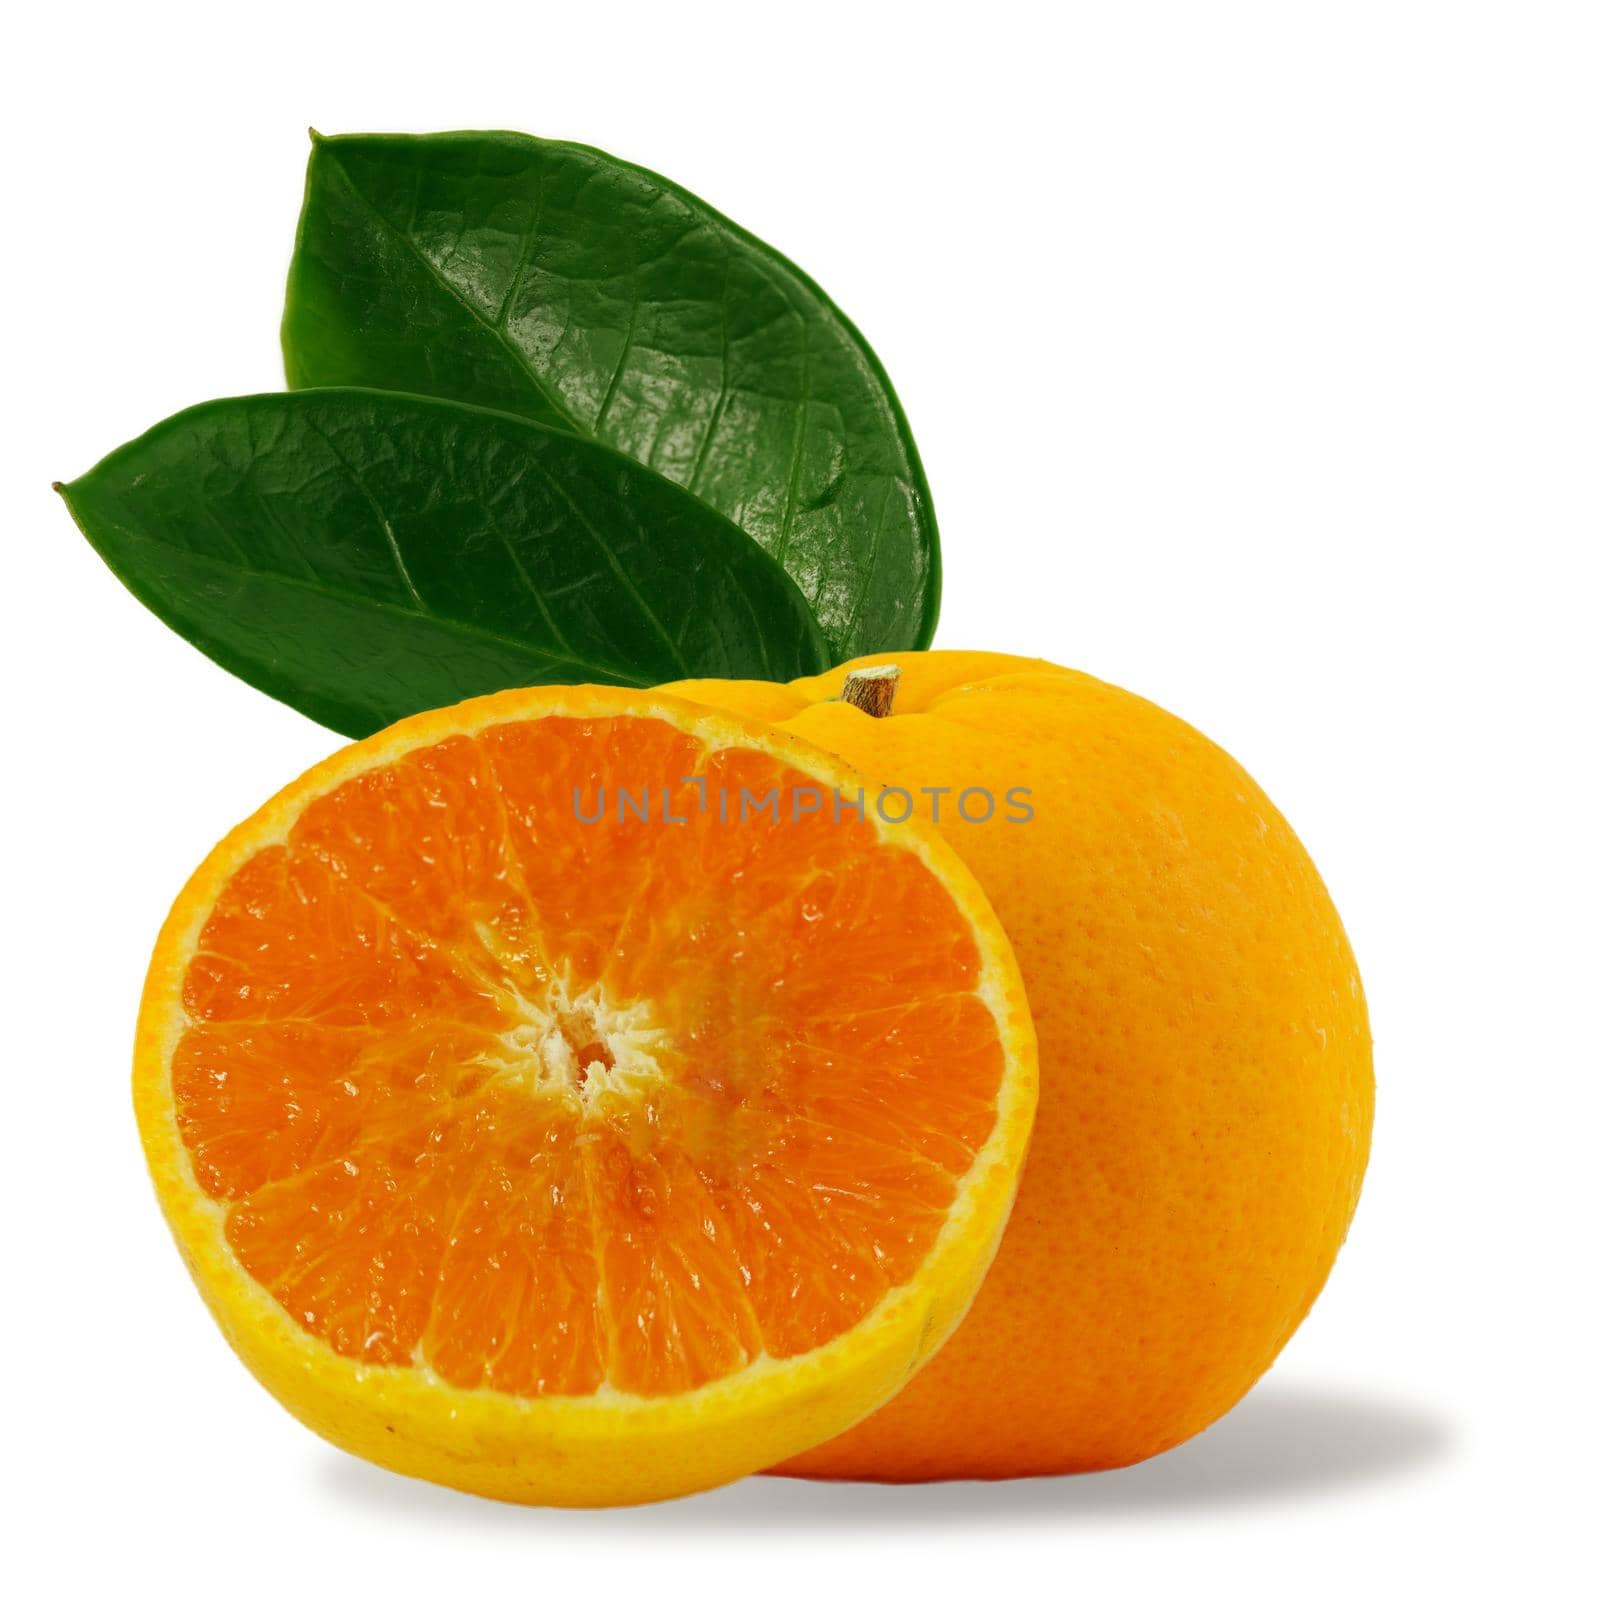 Orange fruit and orange halves
 Isolated on a white background Concept how to live with a naturally refreshing drink containing vitamin C.